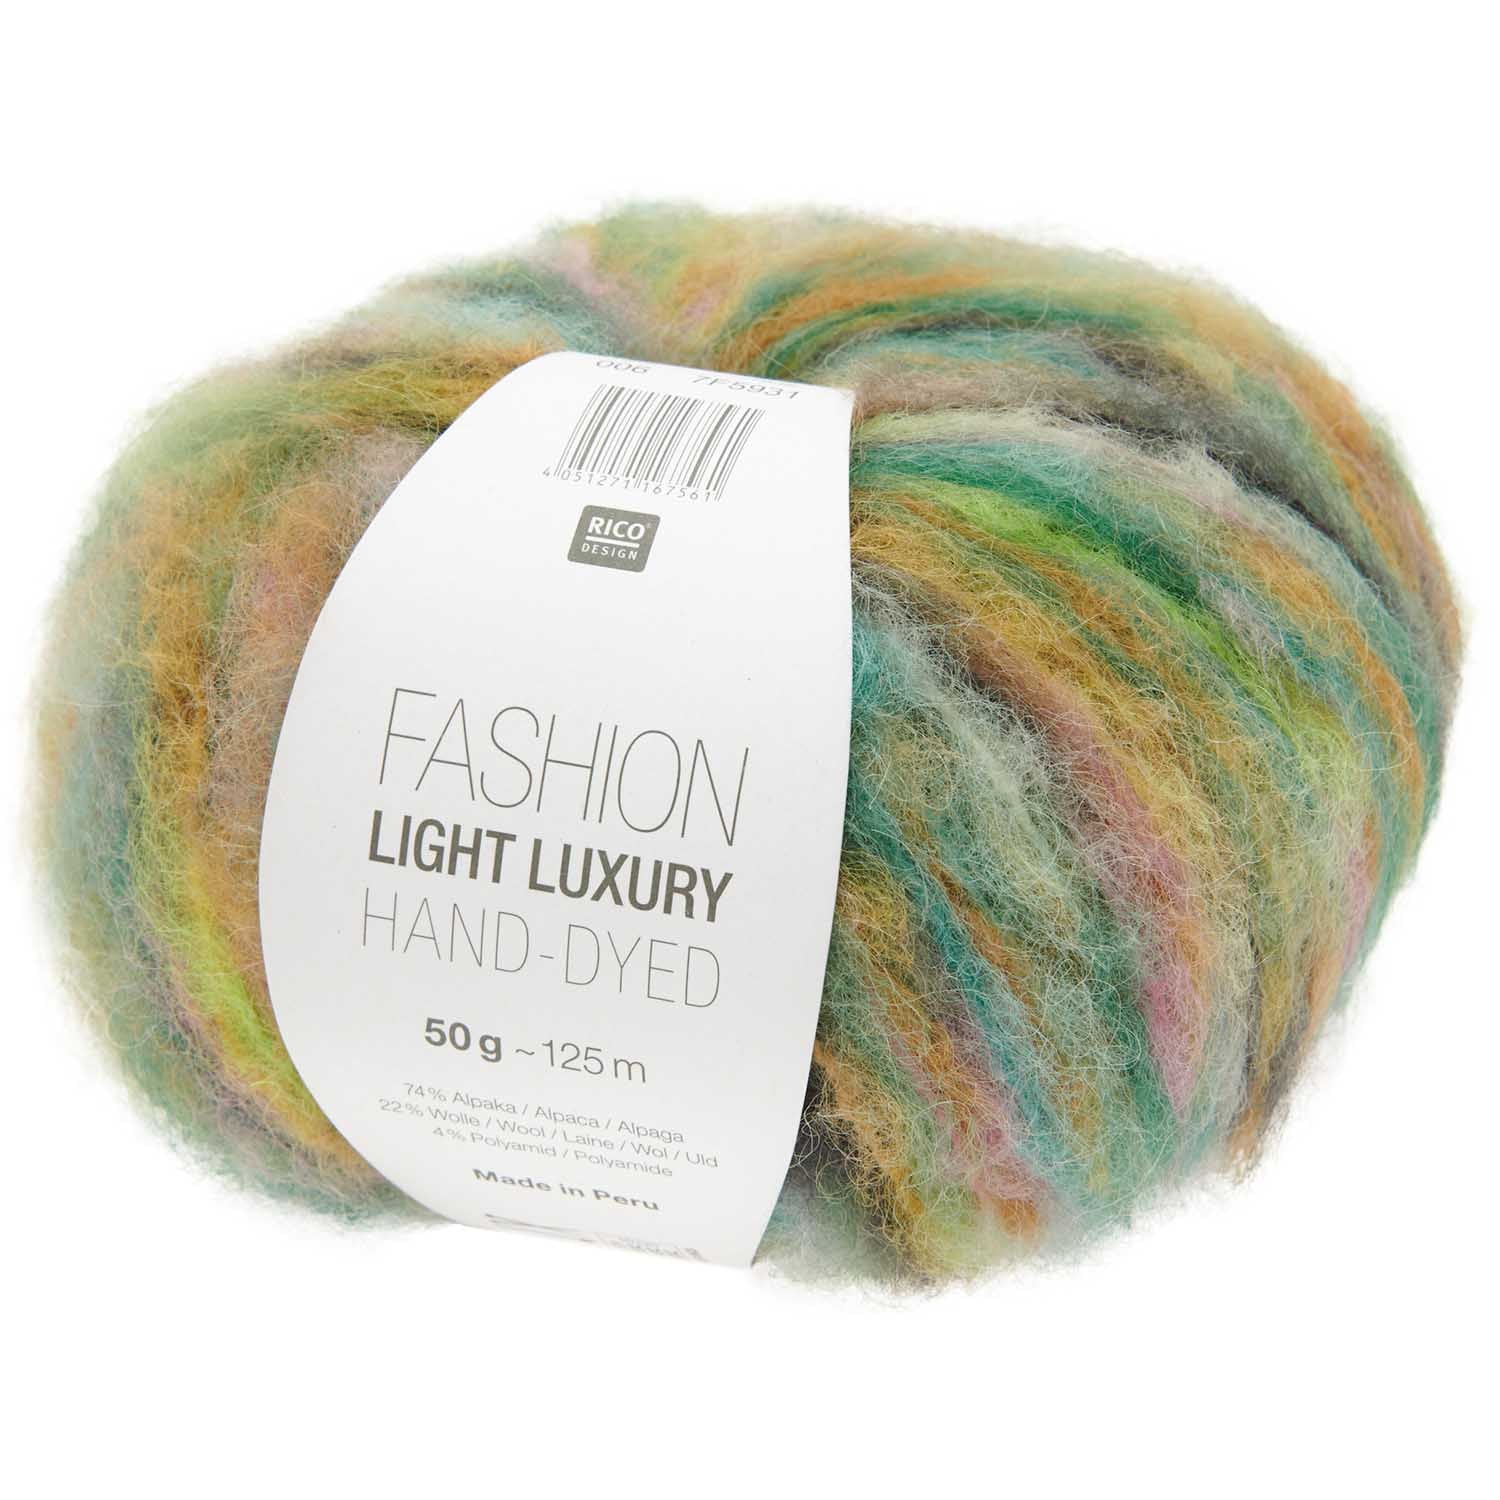 rico fashion light luxury hand-dyed - 006 forest